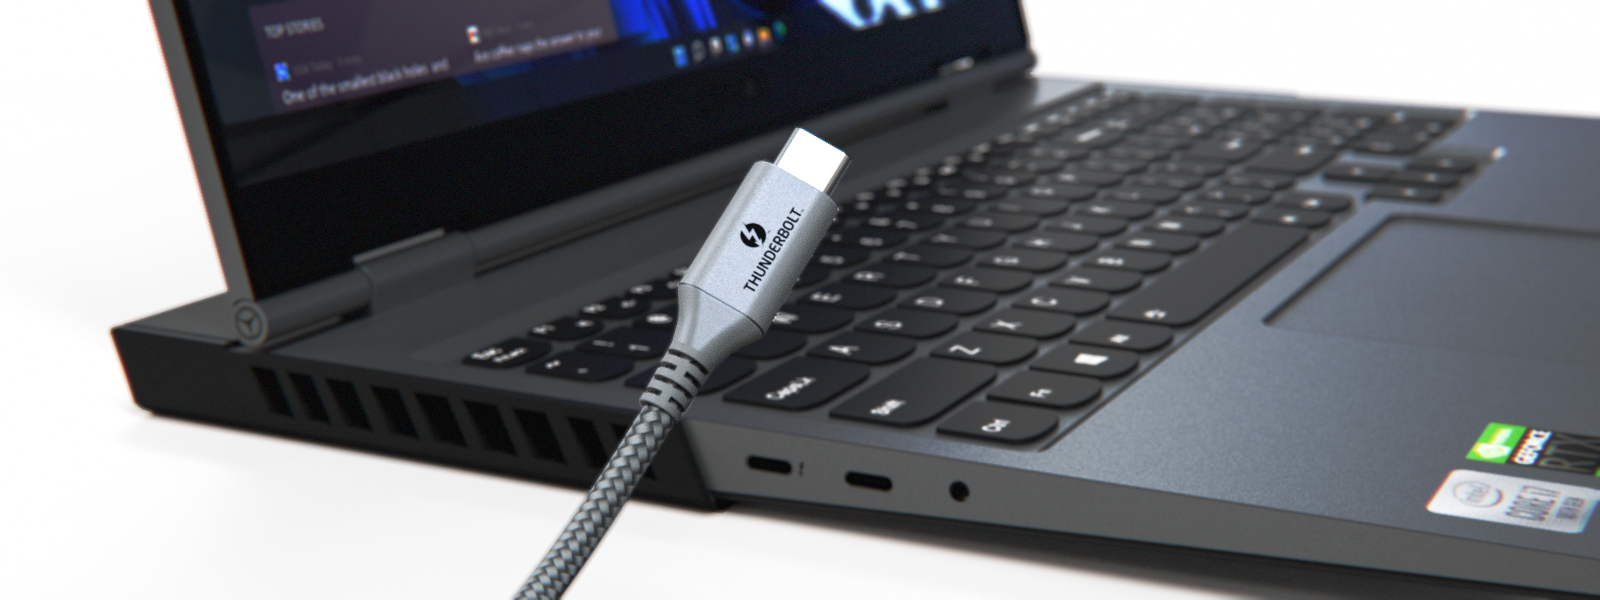 USB4 to become mainstream quickly than Thunderbolt 4